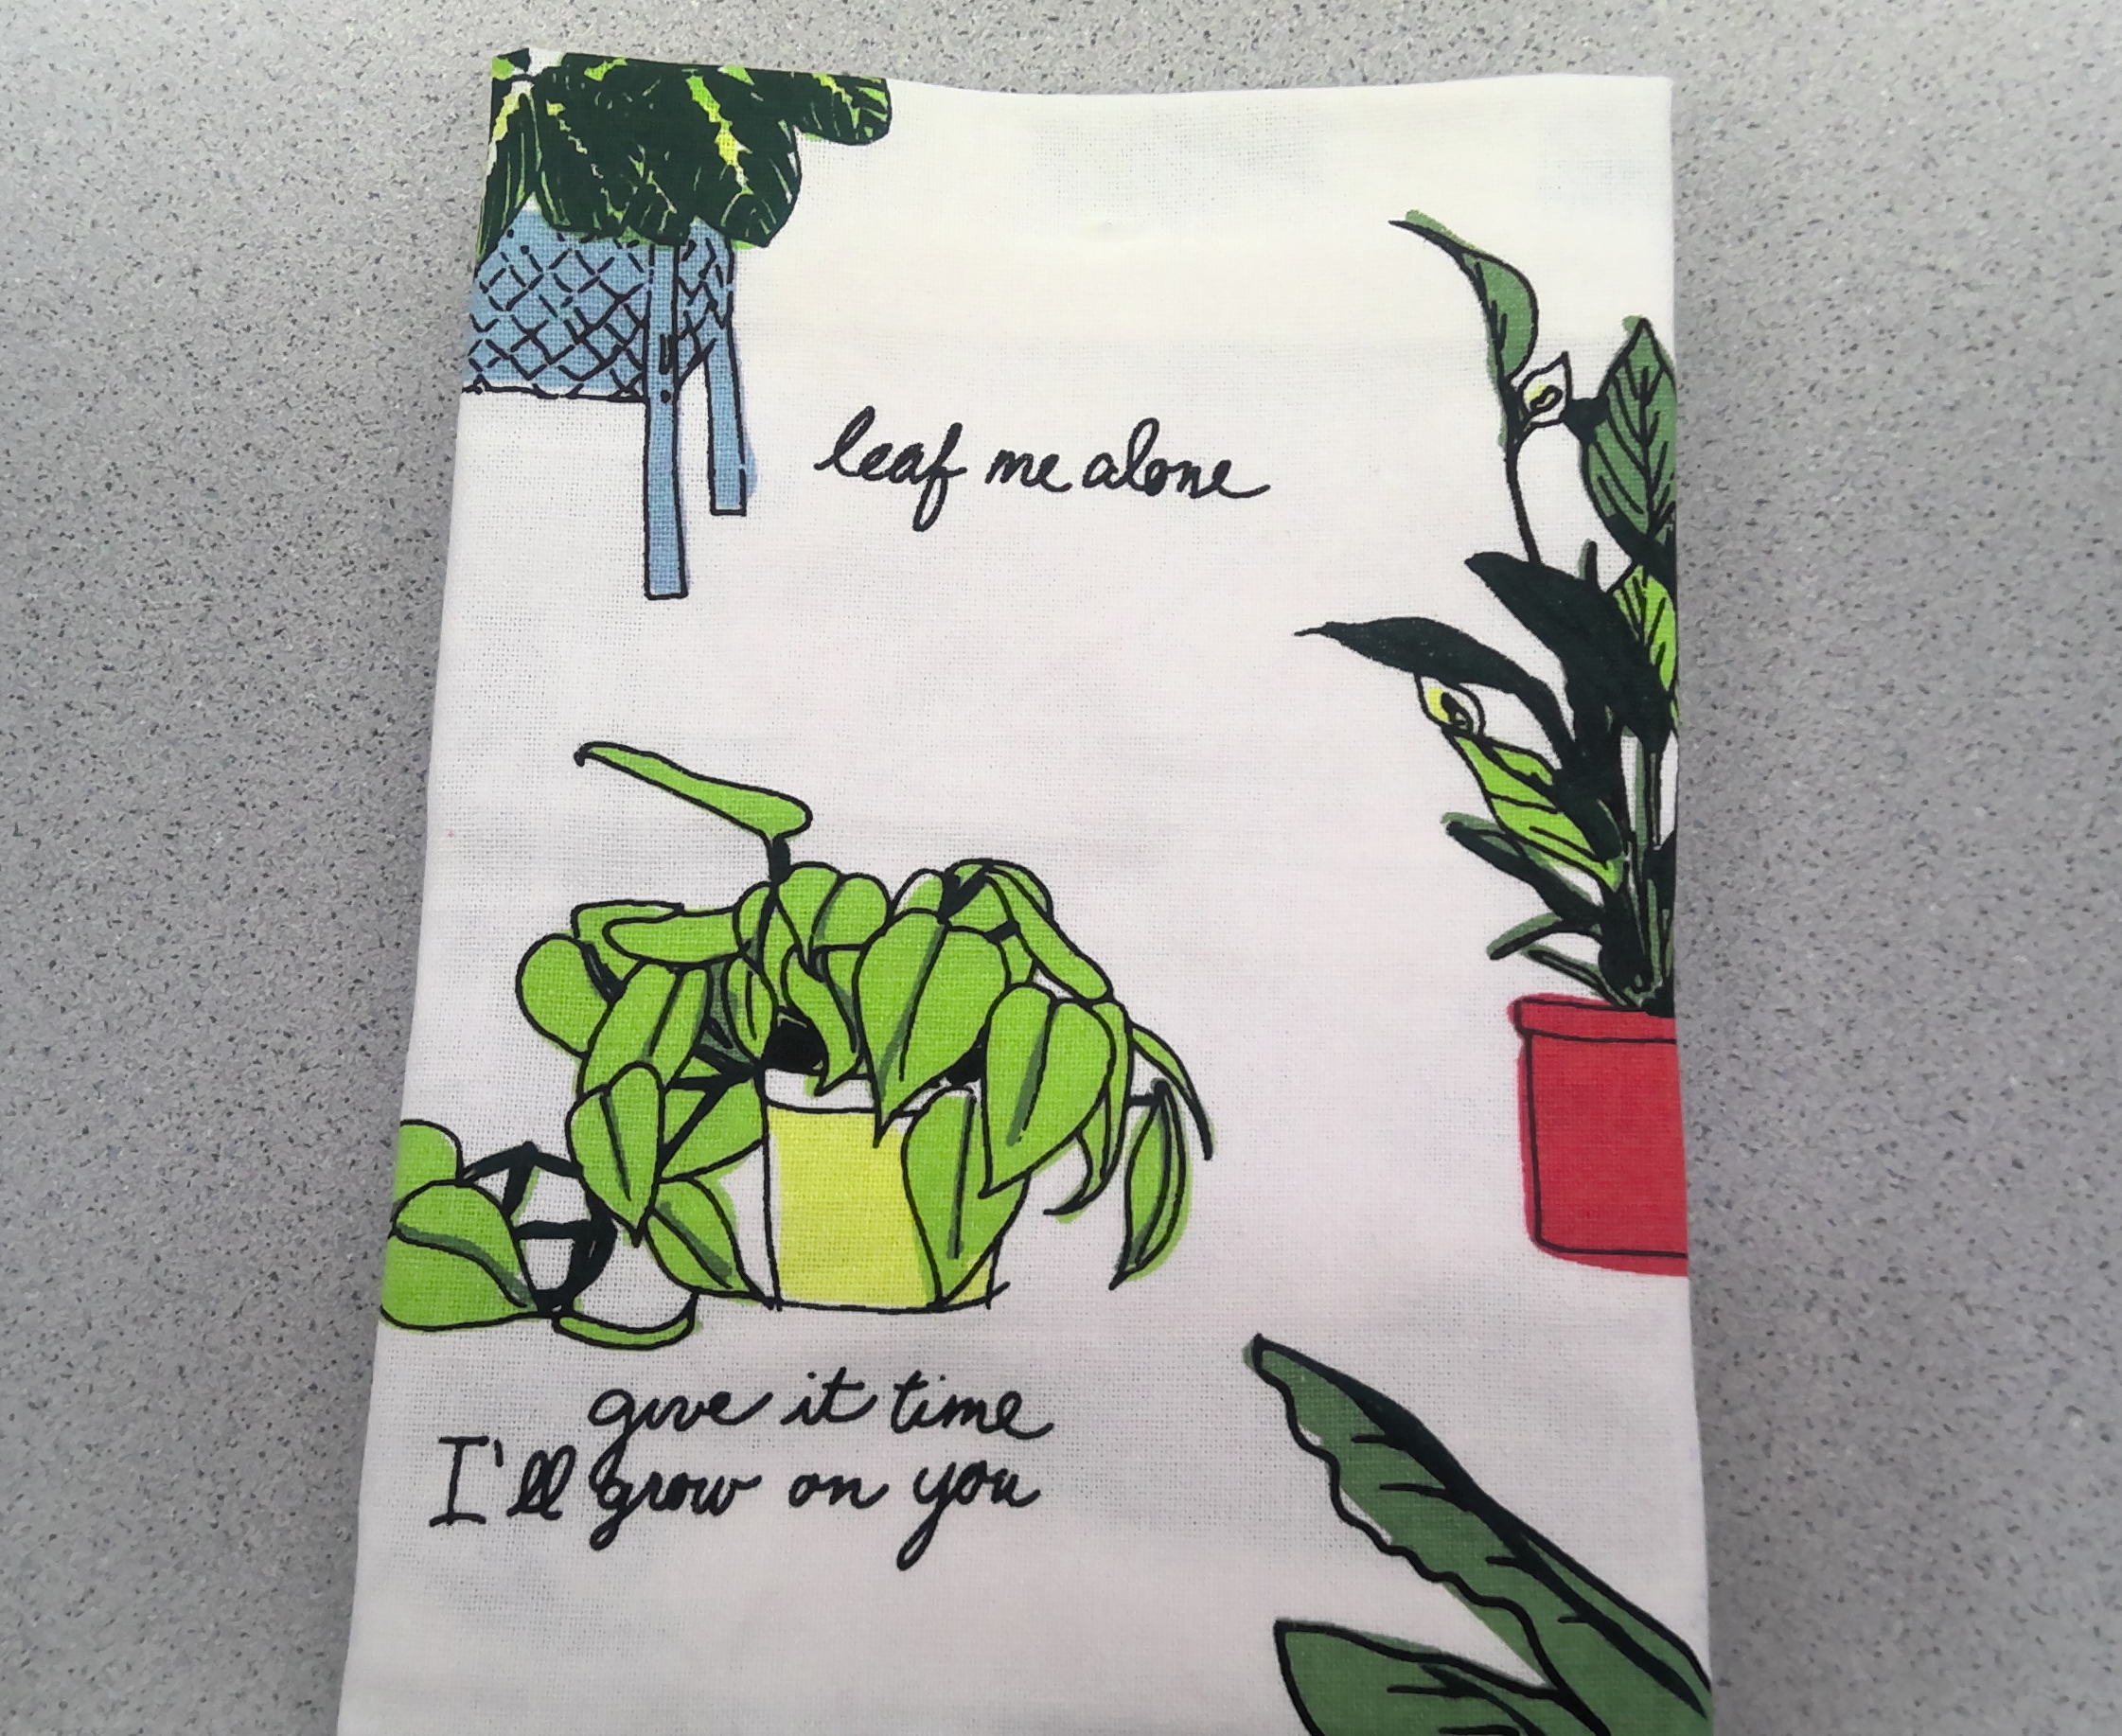 A photo of a tea towel that says "leaf me alone" and "give it time, I'll grow on you"